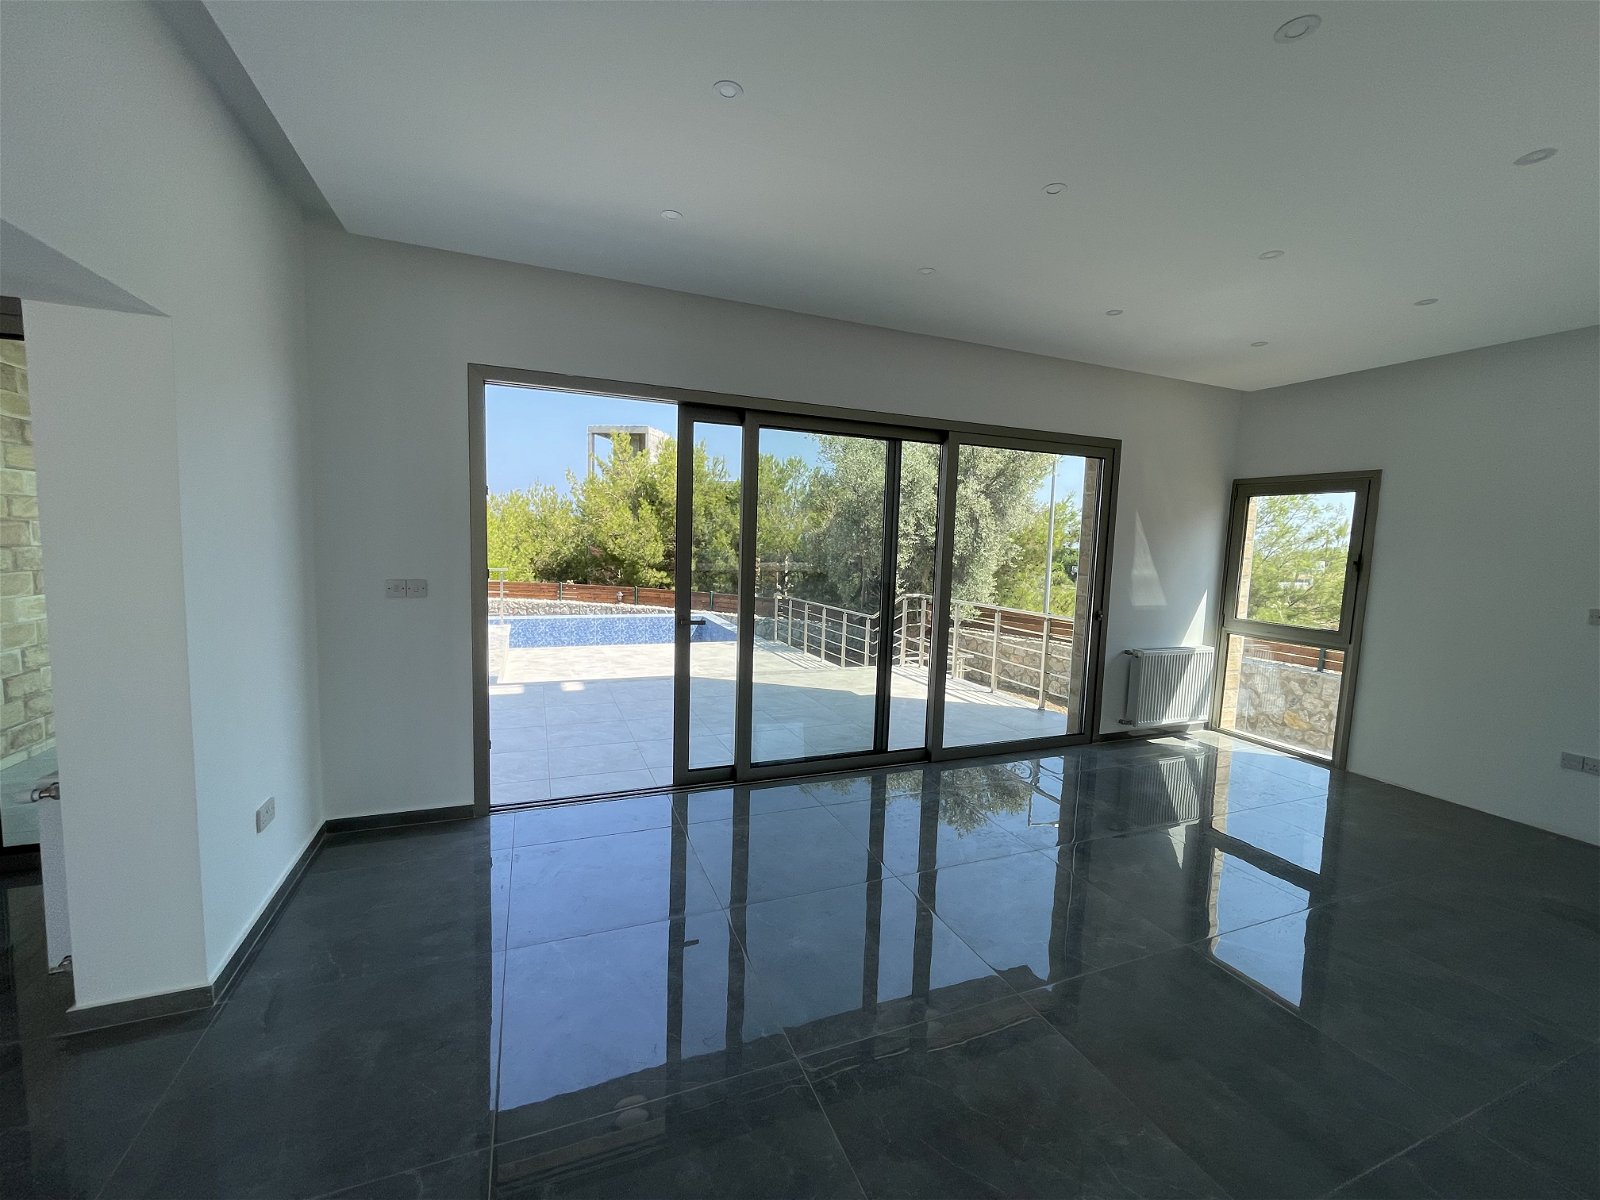 Stunning 3+1 Modern Villa with Sea and Mountain Views in Catalkoy, Kyrenia-cefd6245-d83c-4544-b8d9-2eec9c380445